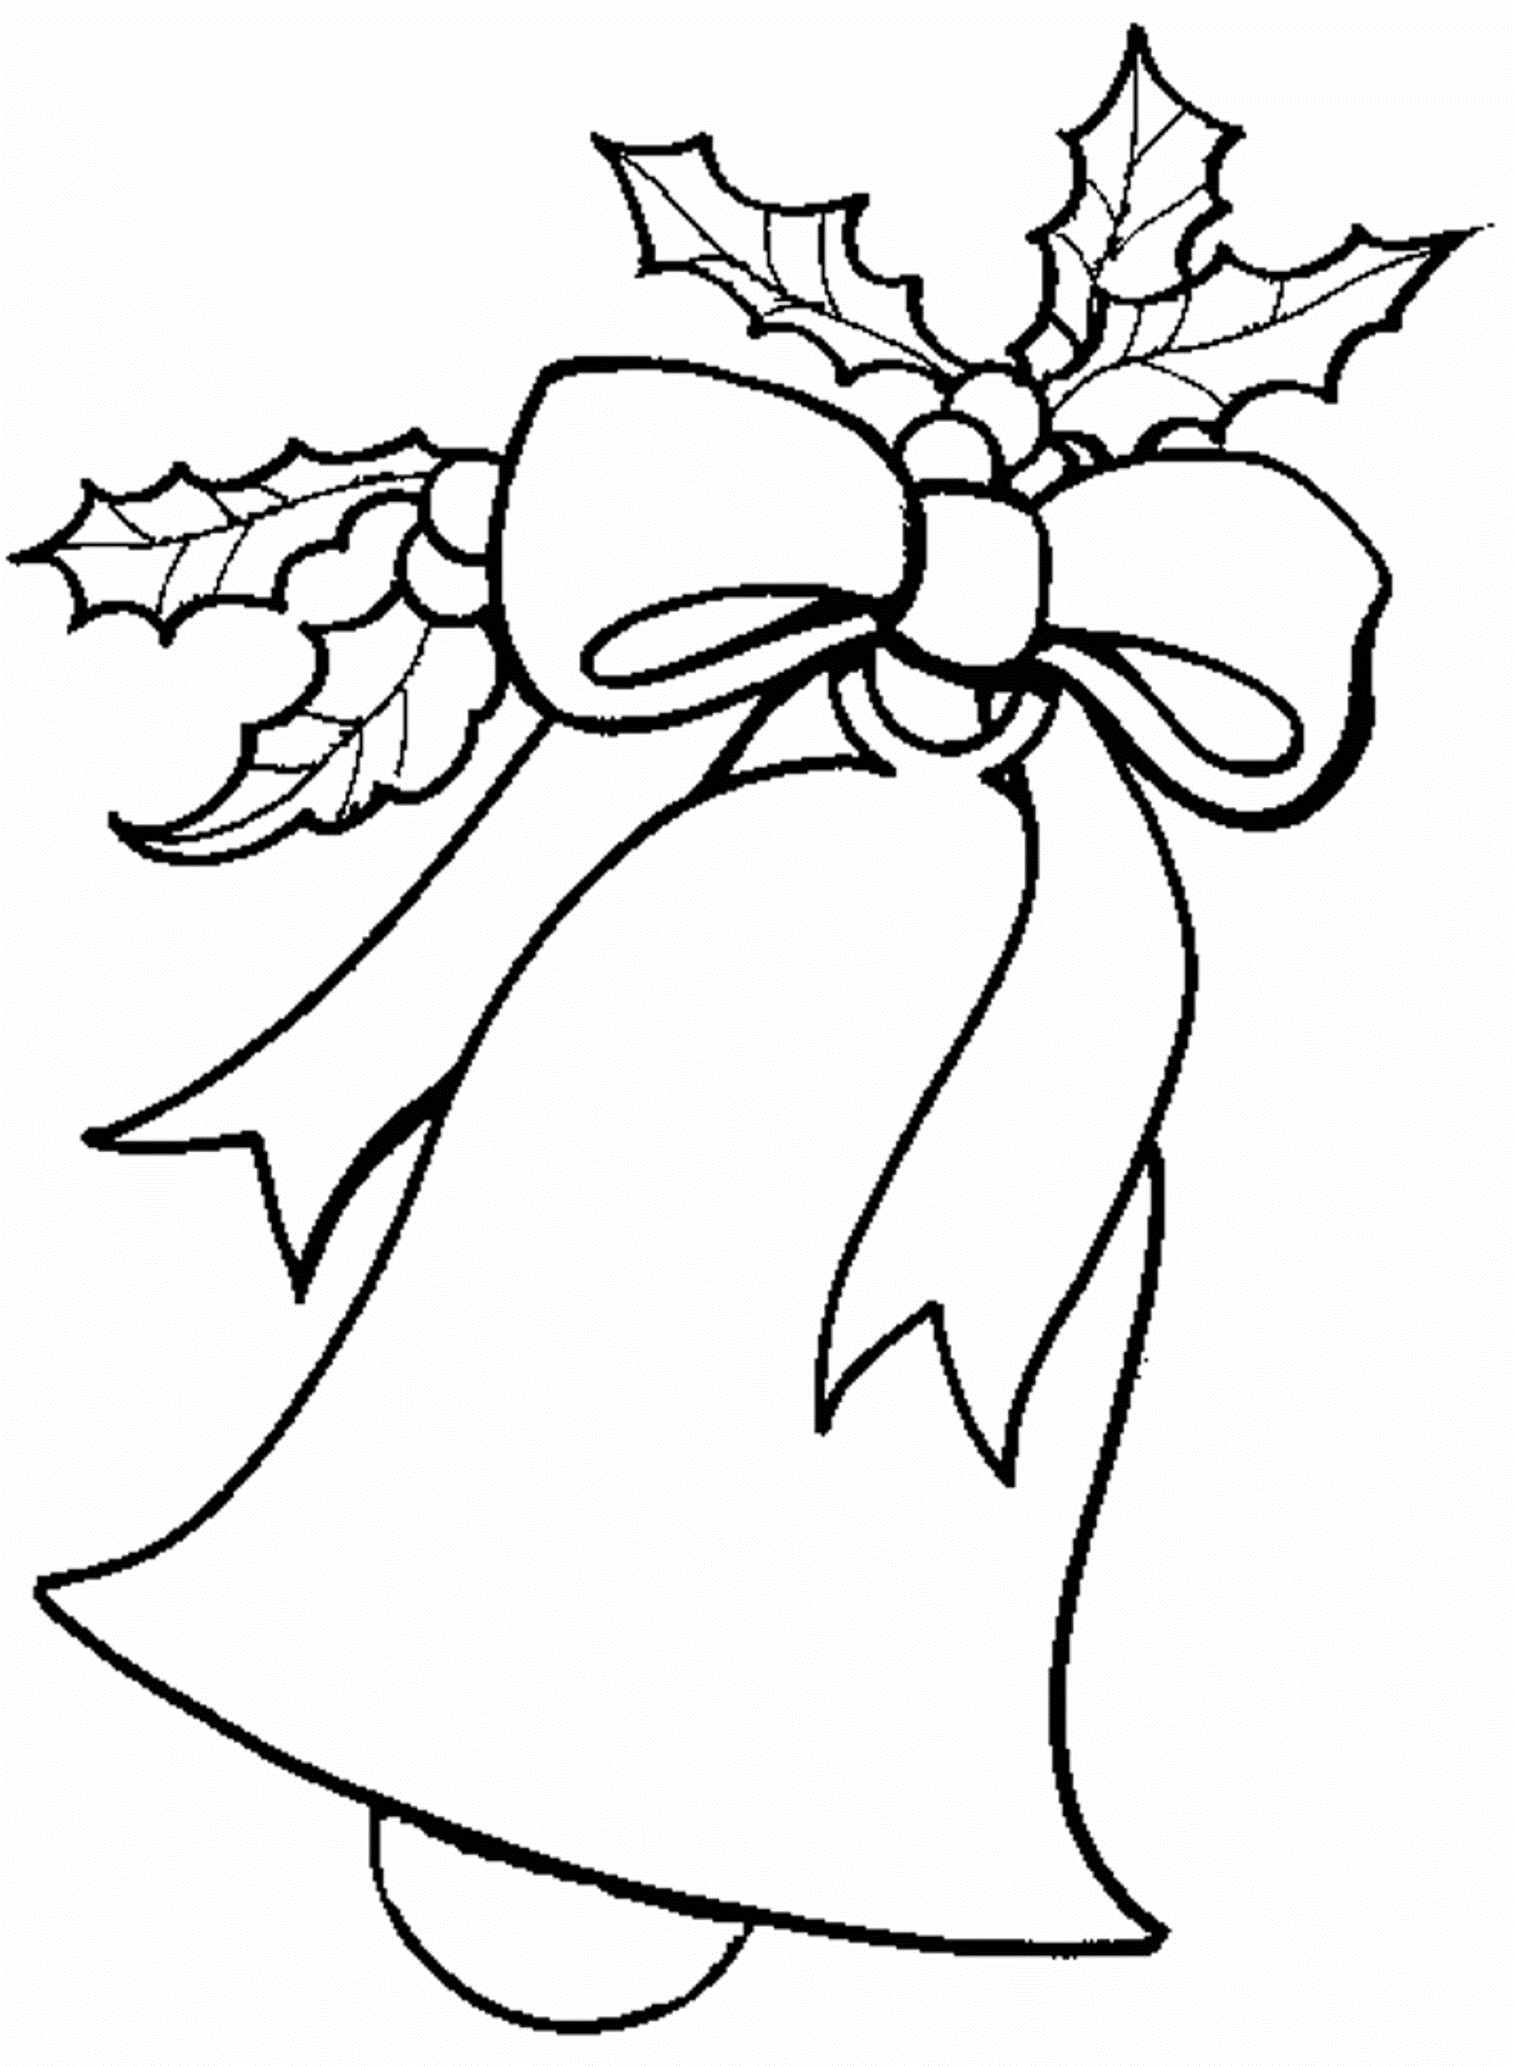 Free Coloring Pages For Christmas Bell | Christmas Coloring pages ...